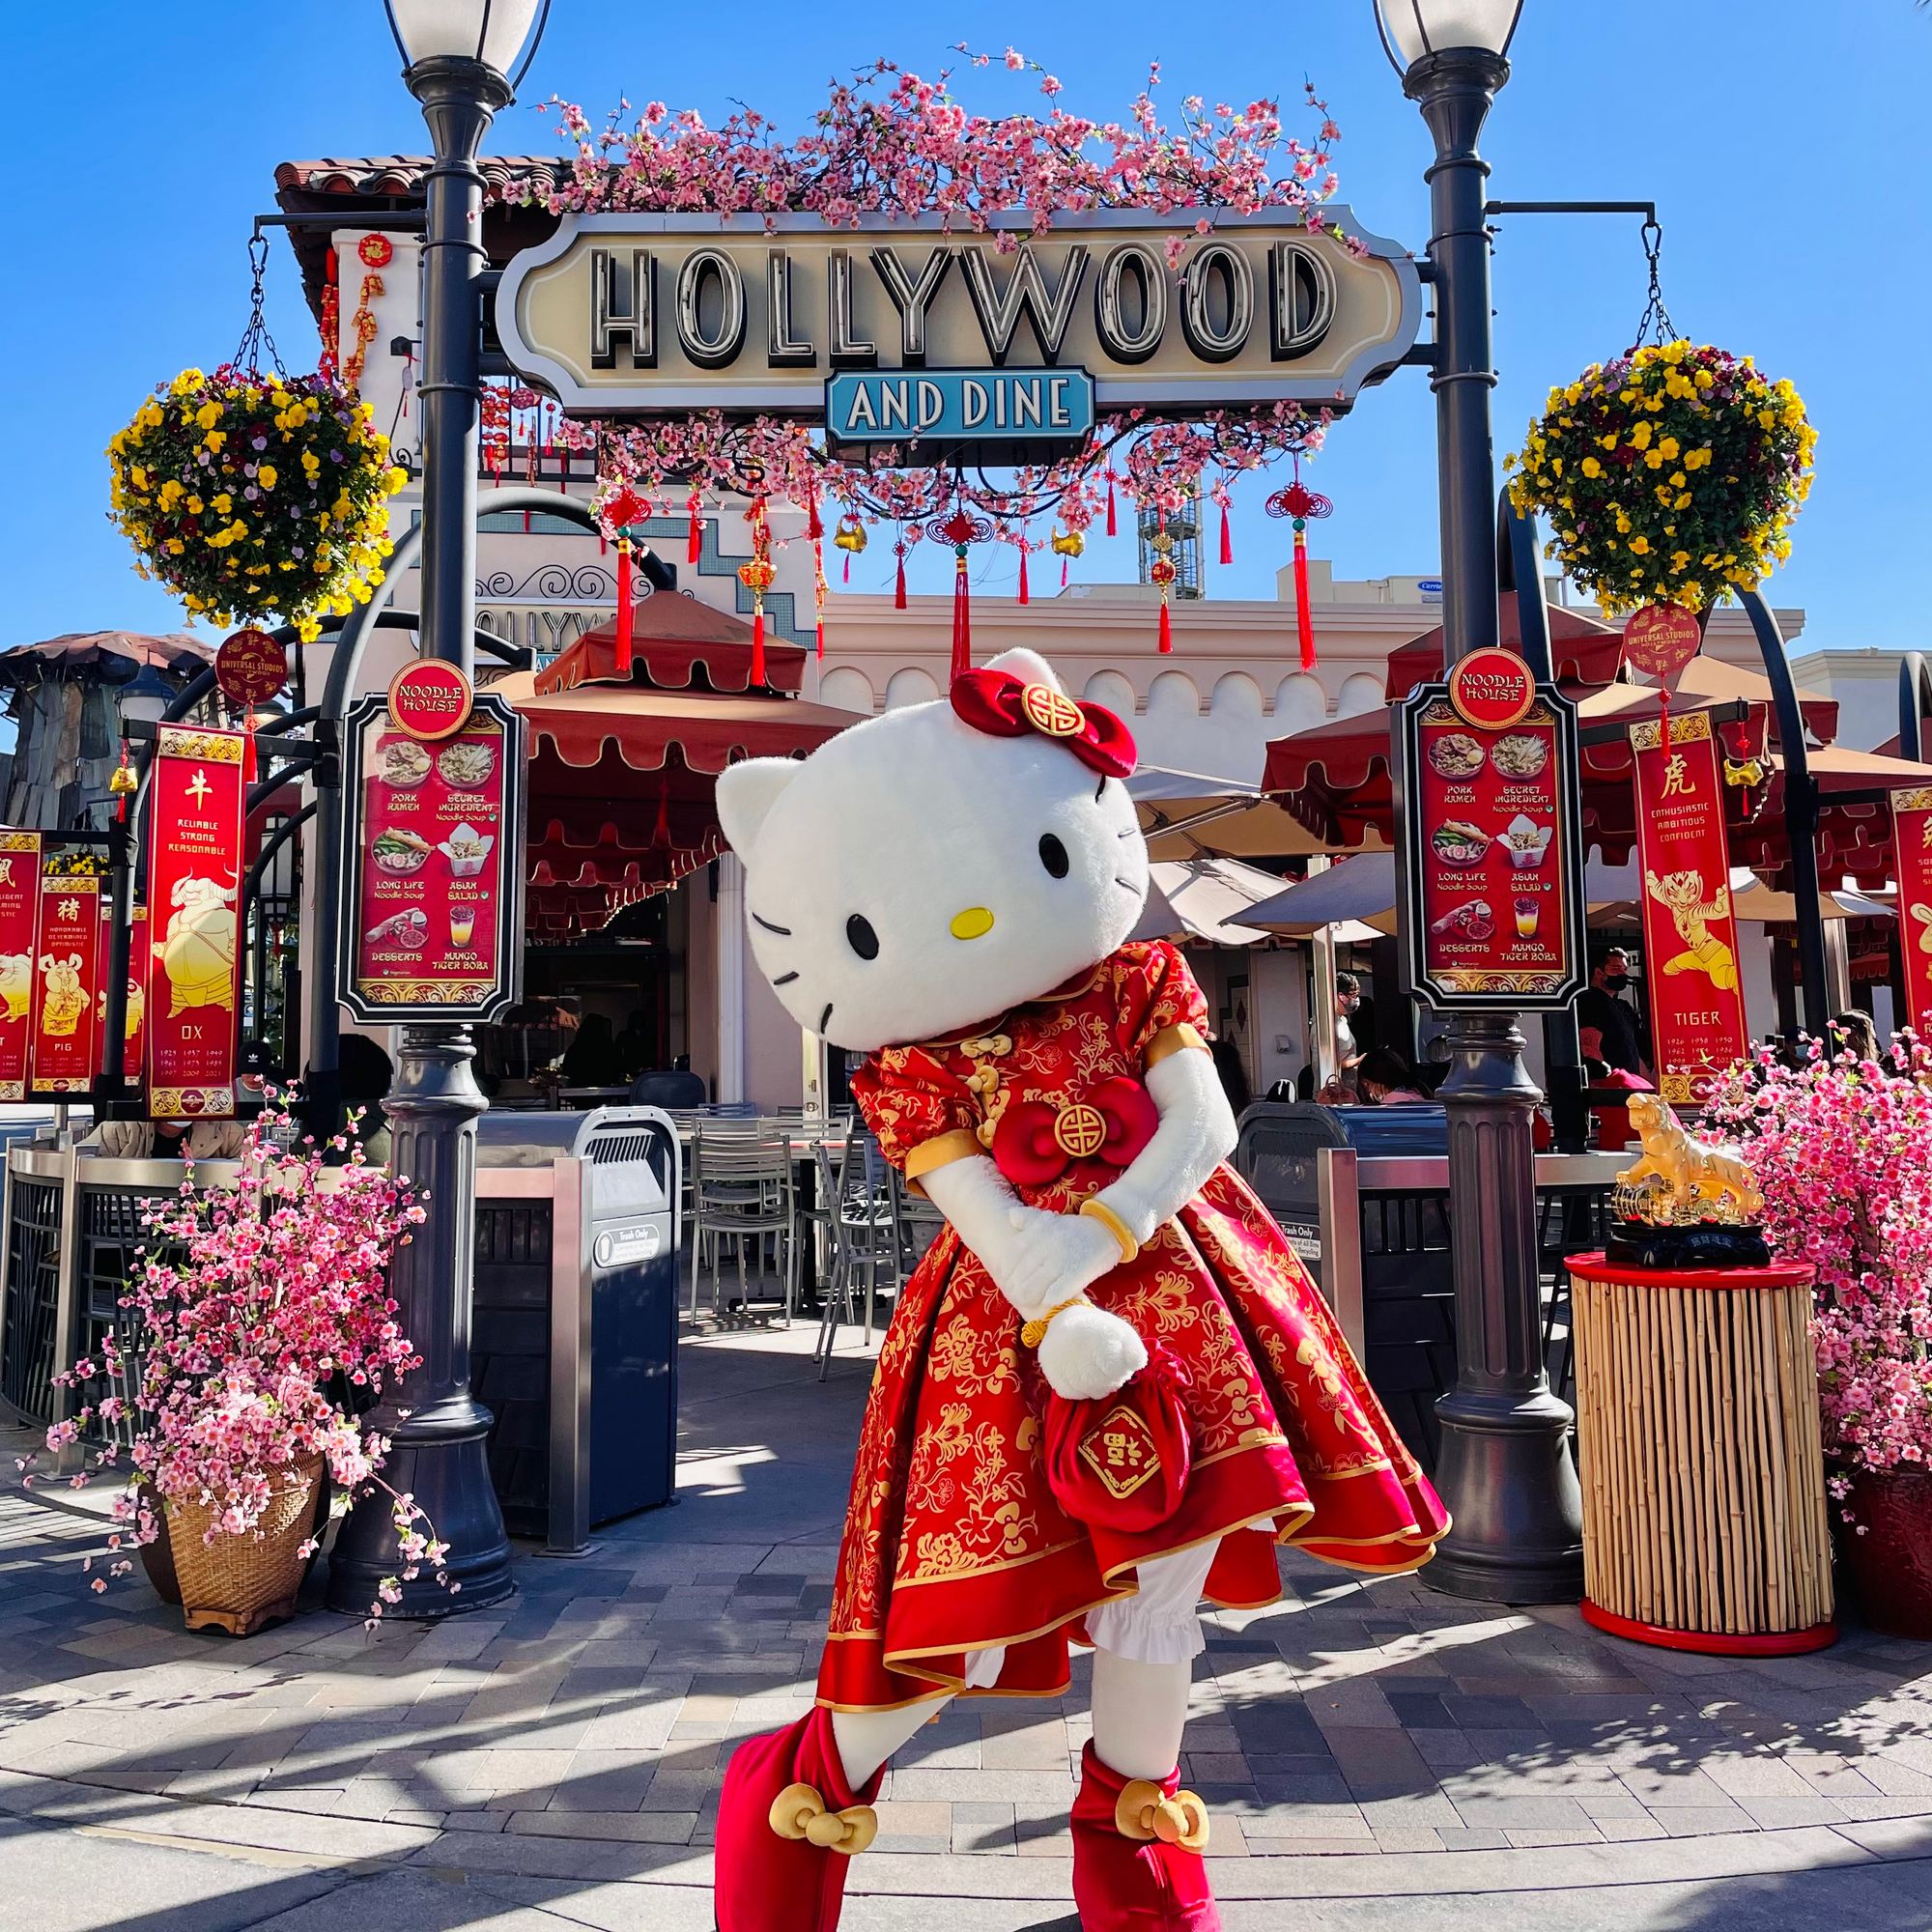 Sanrio, Other, Hello Kitty Meets Gucci In Vogue